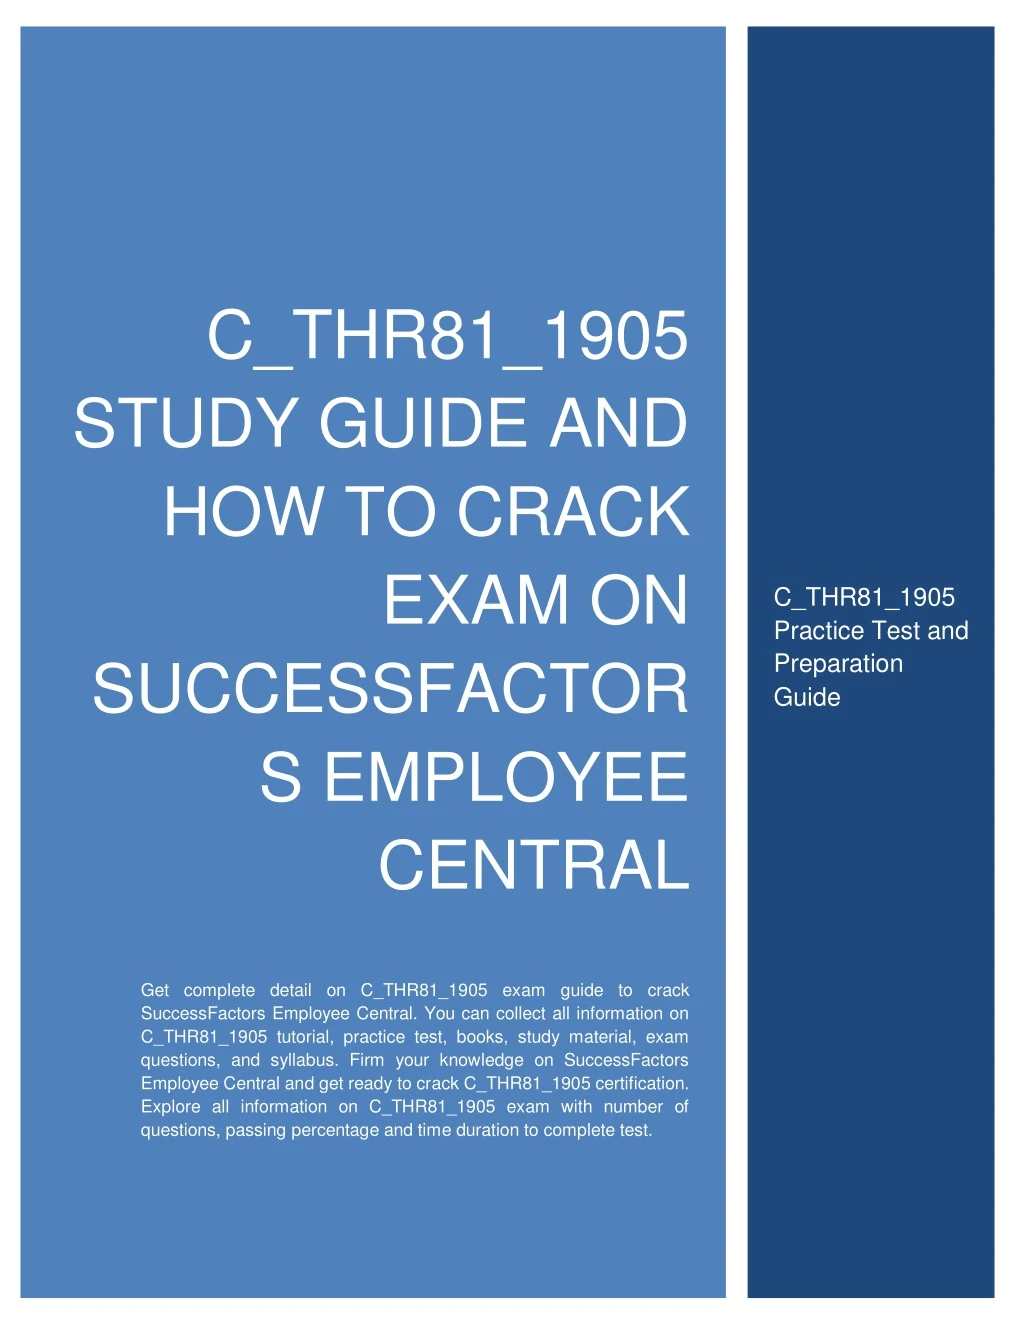 c thr81 1905 study guide and how to crack exam